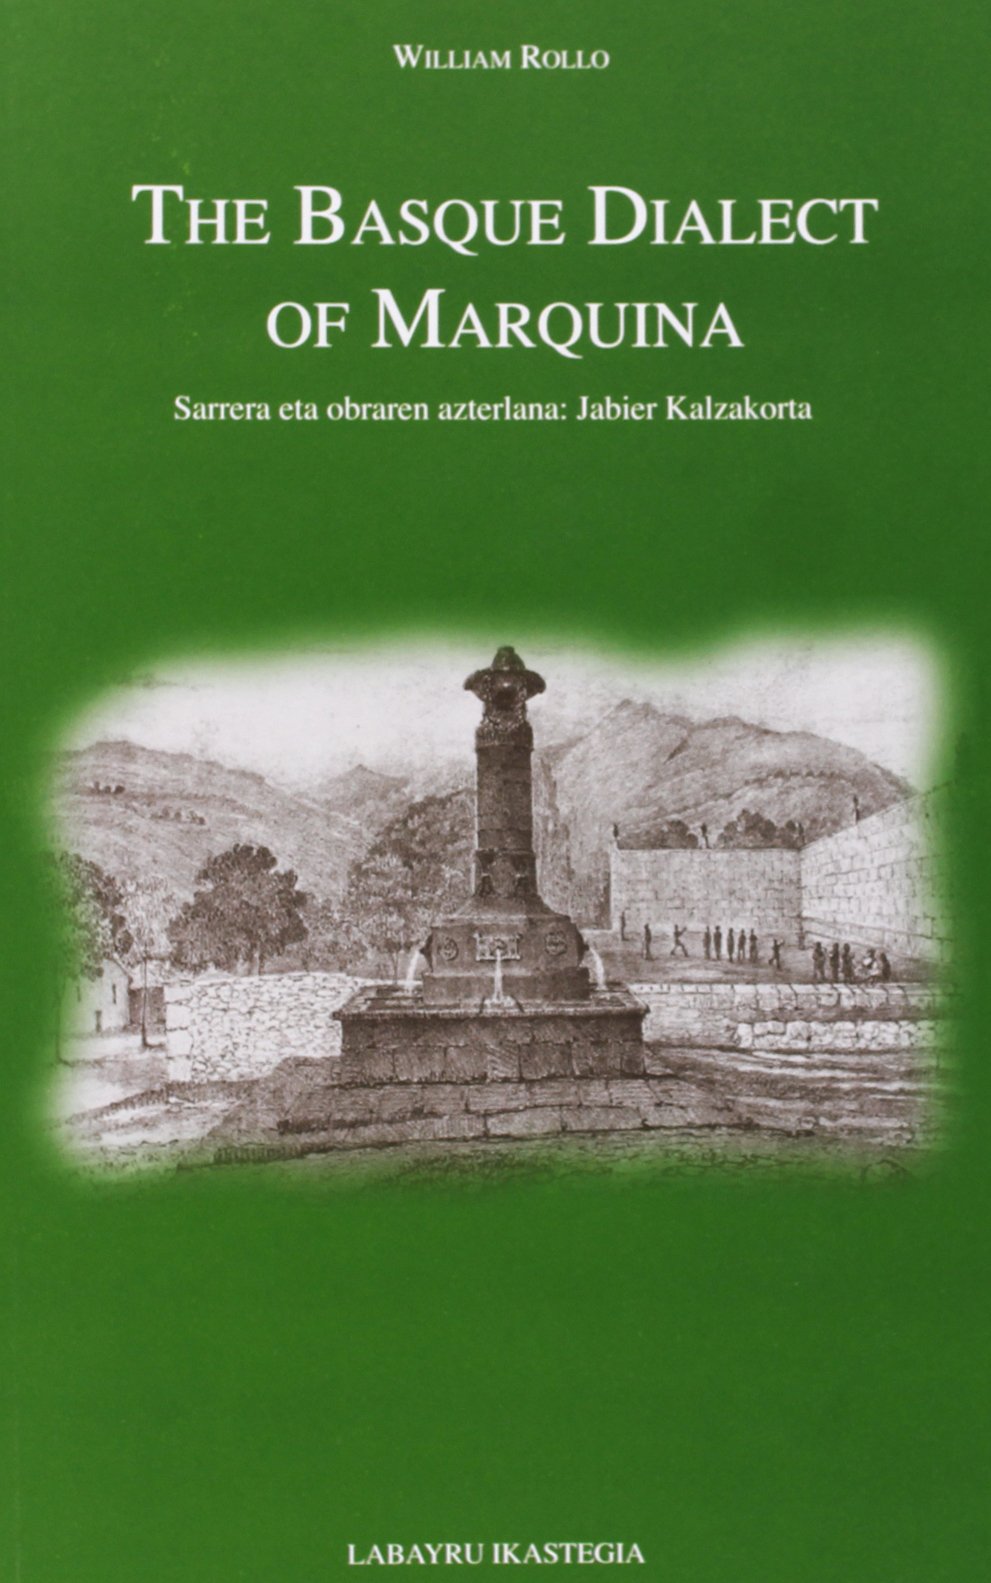 The Basque Dialect of Marquina (Rollo, 1925)